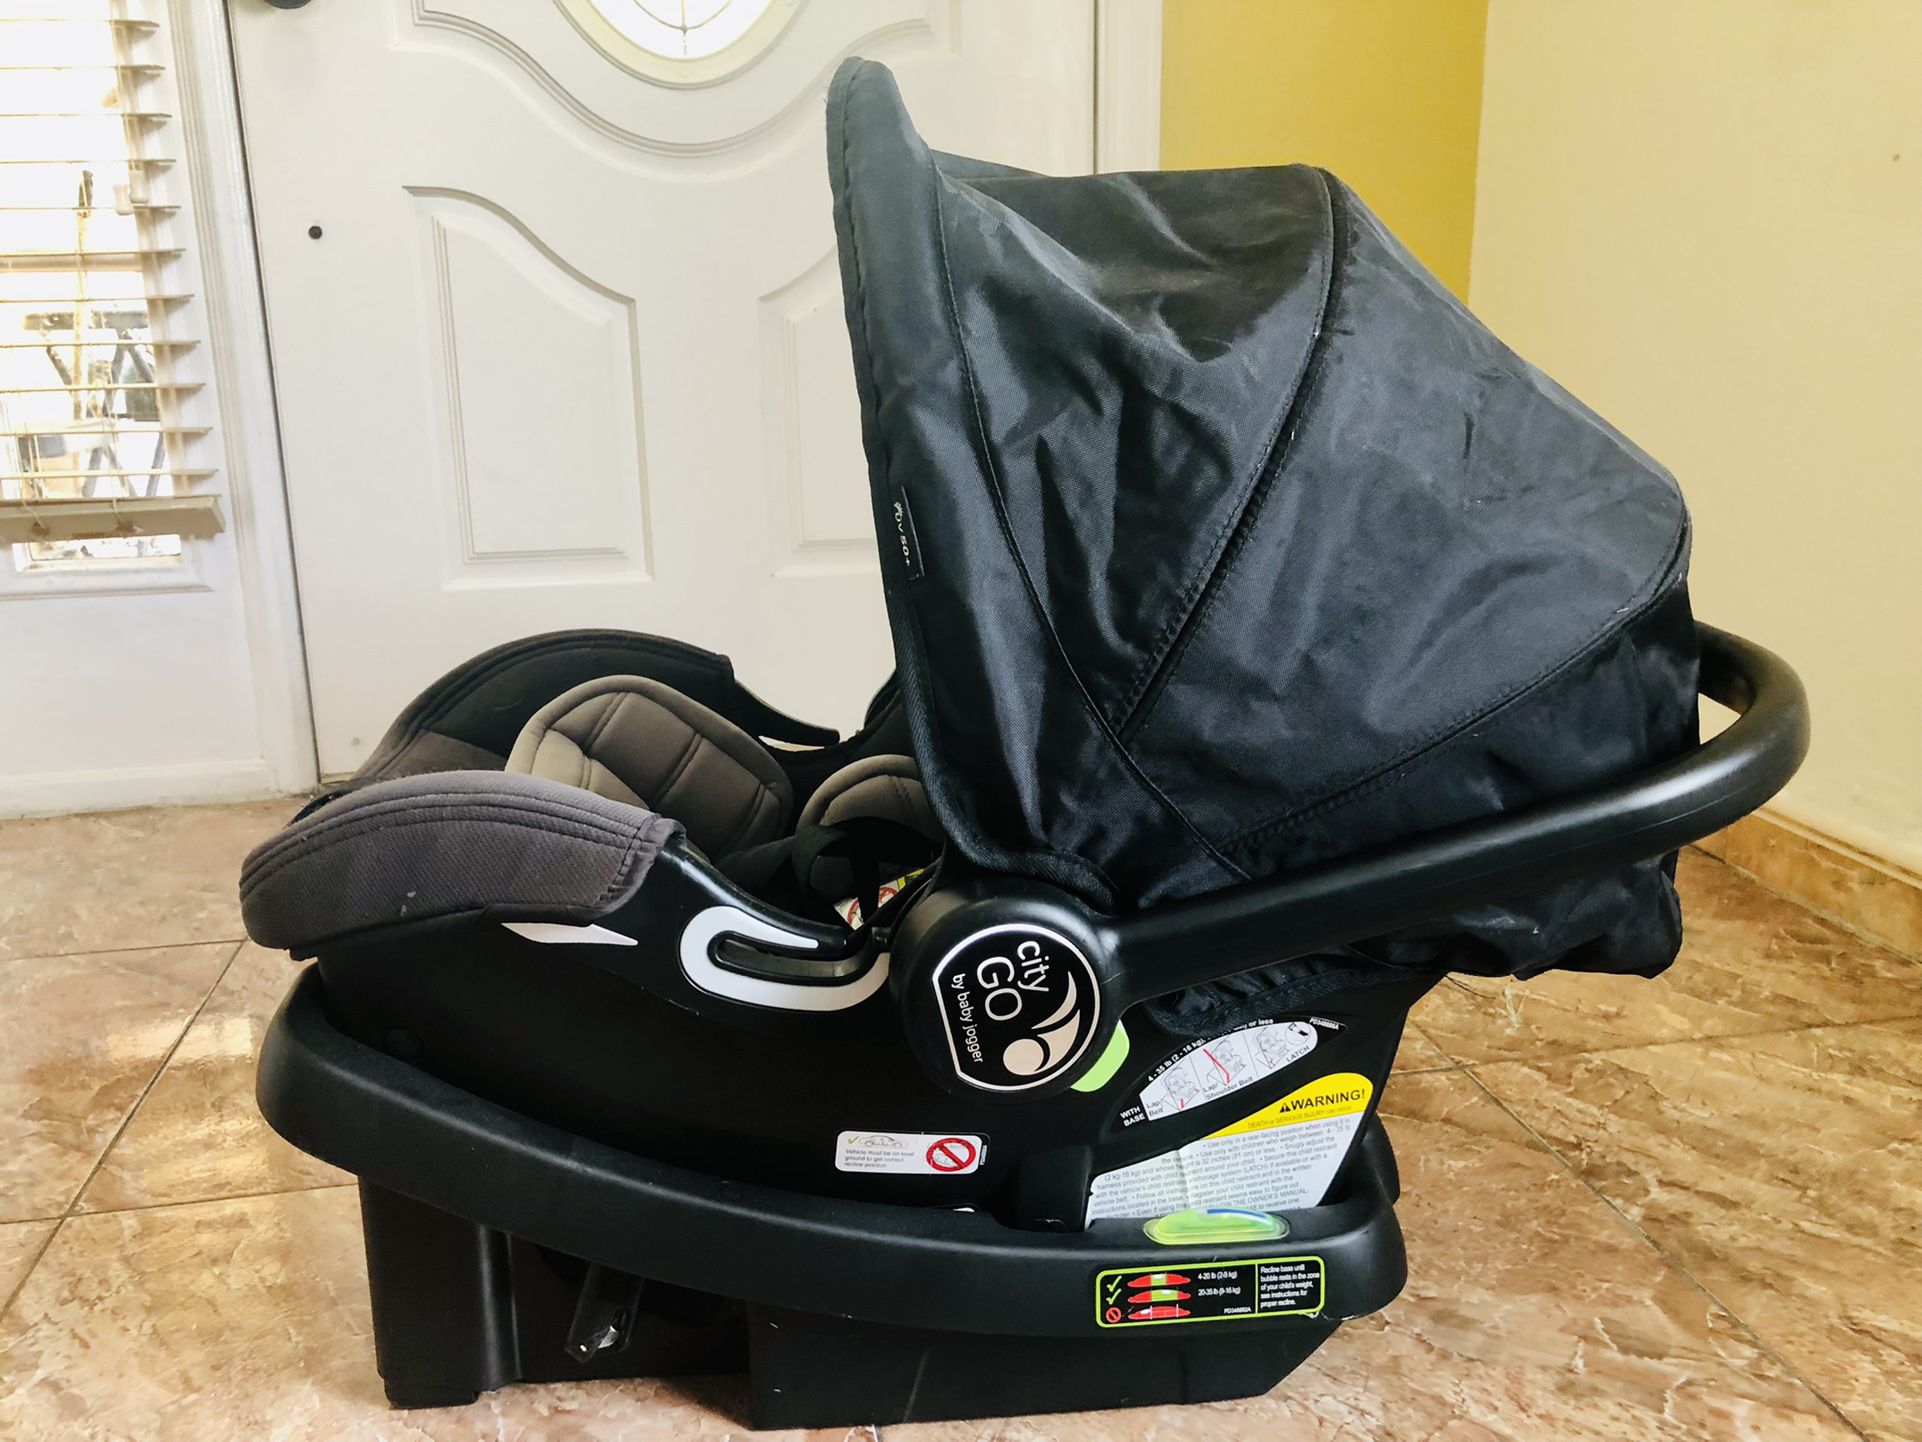 4 Child Car Seats - $40 Each | Buy 2 or More, Get a Free Bag of Clothes